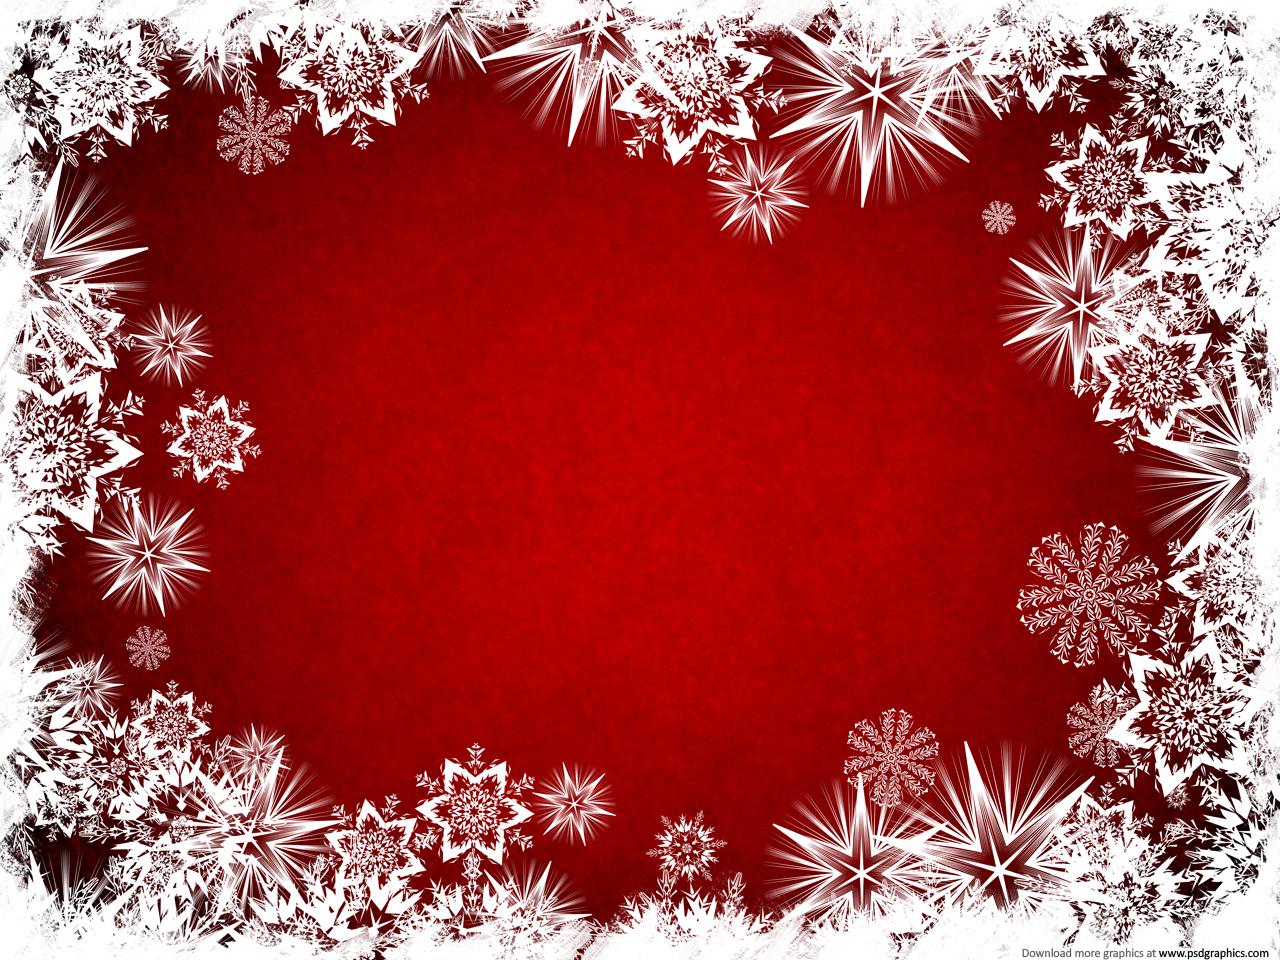 Abstract Christmas background PSDGraphics 1280x960